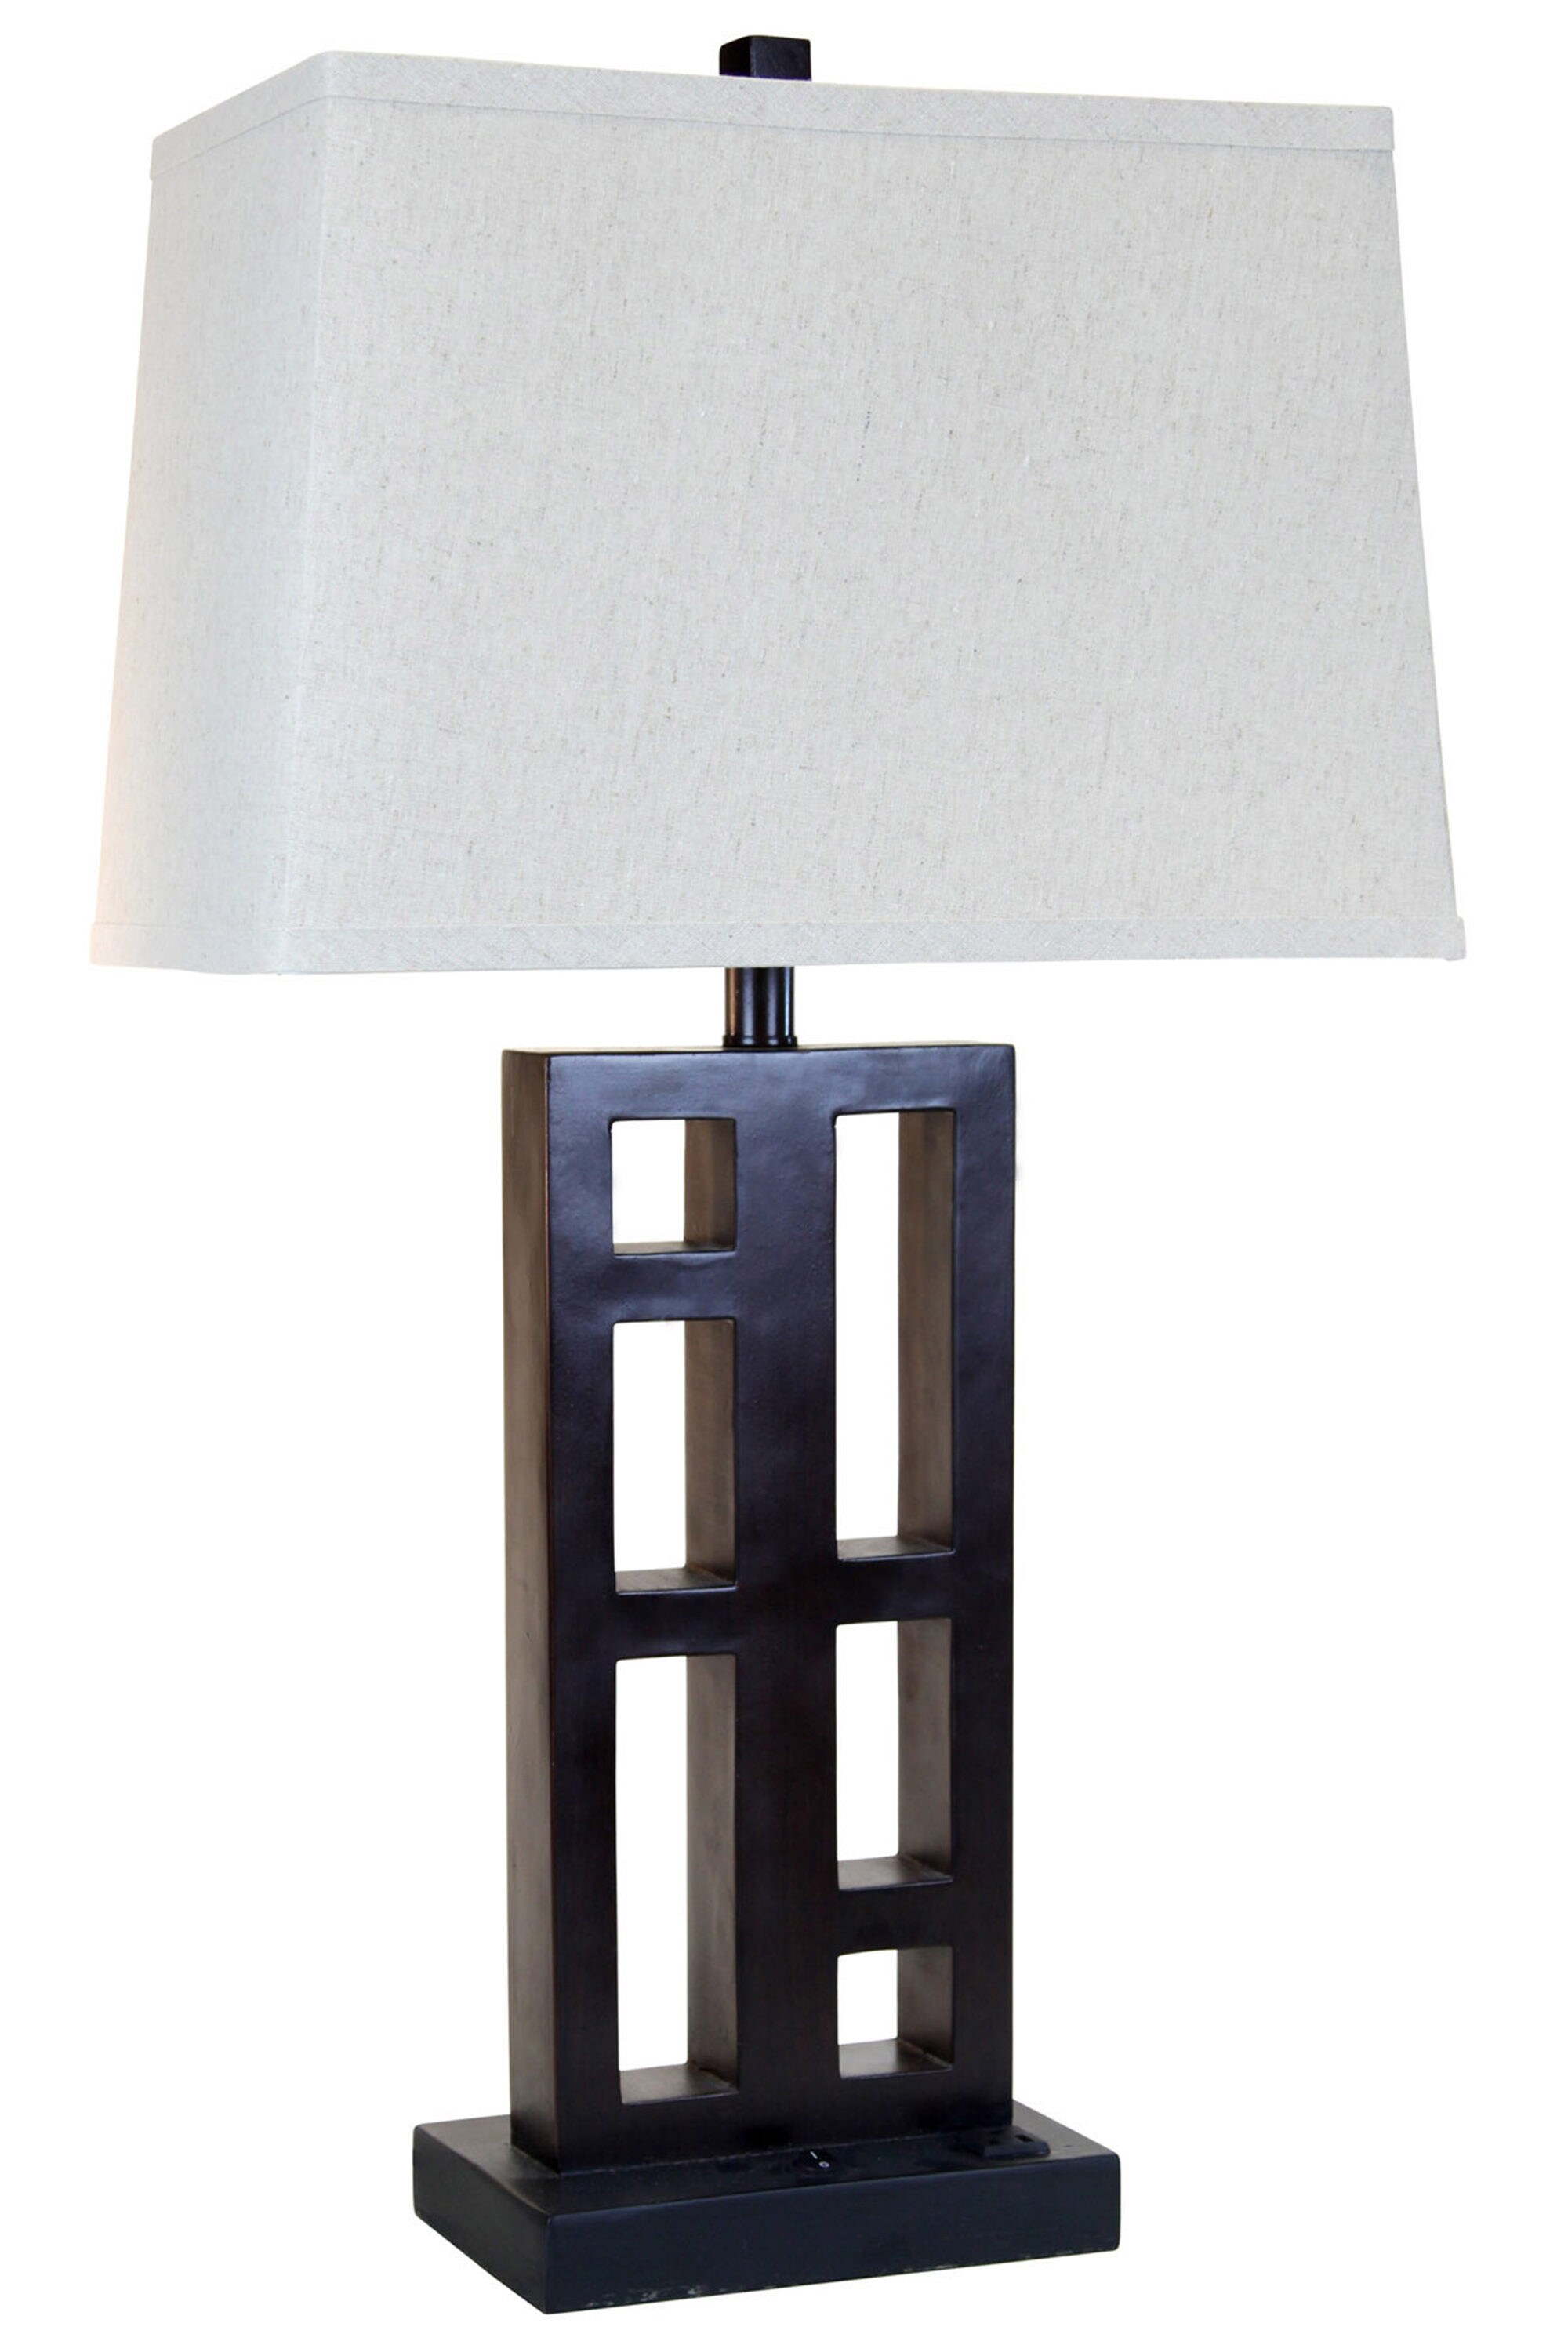 StyleCraft Home Collection 30-in Expresso Table Lamp with Fabric Shade in Table Lamps at Lowes.com